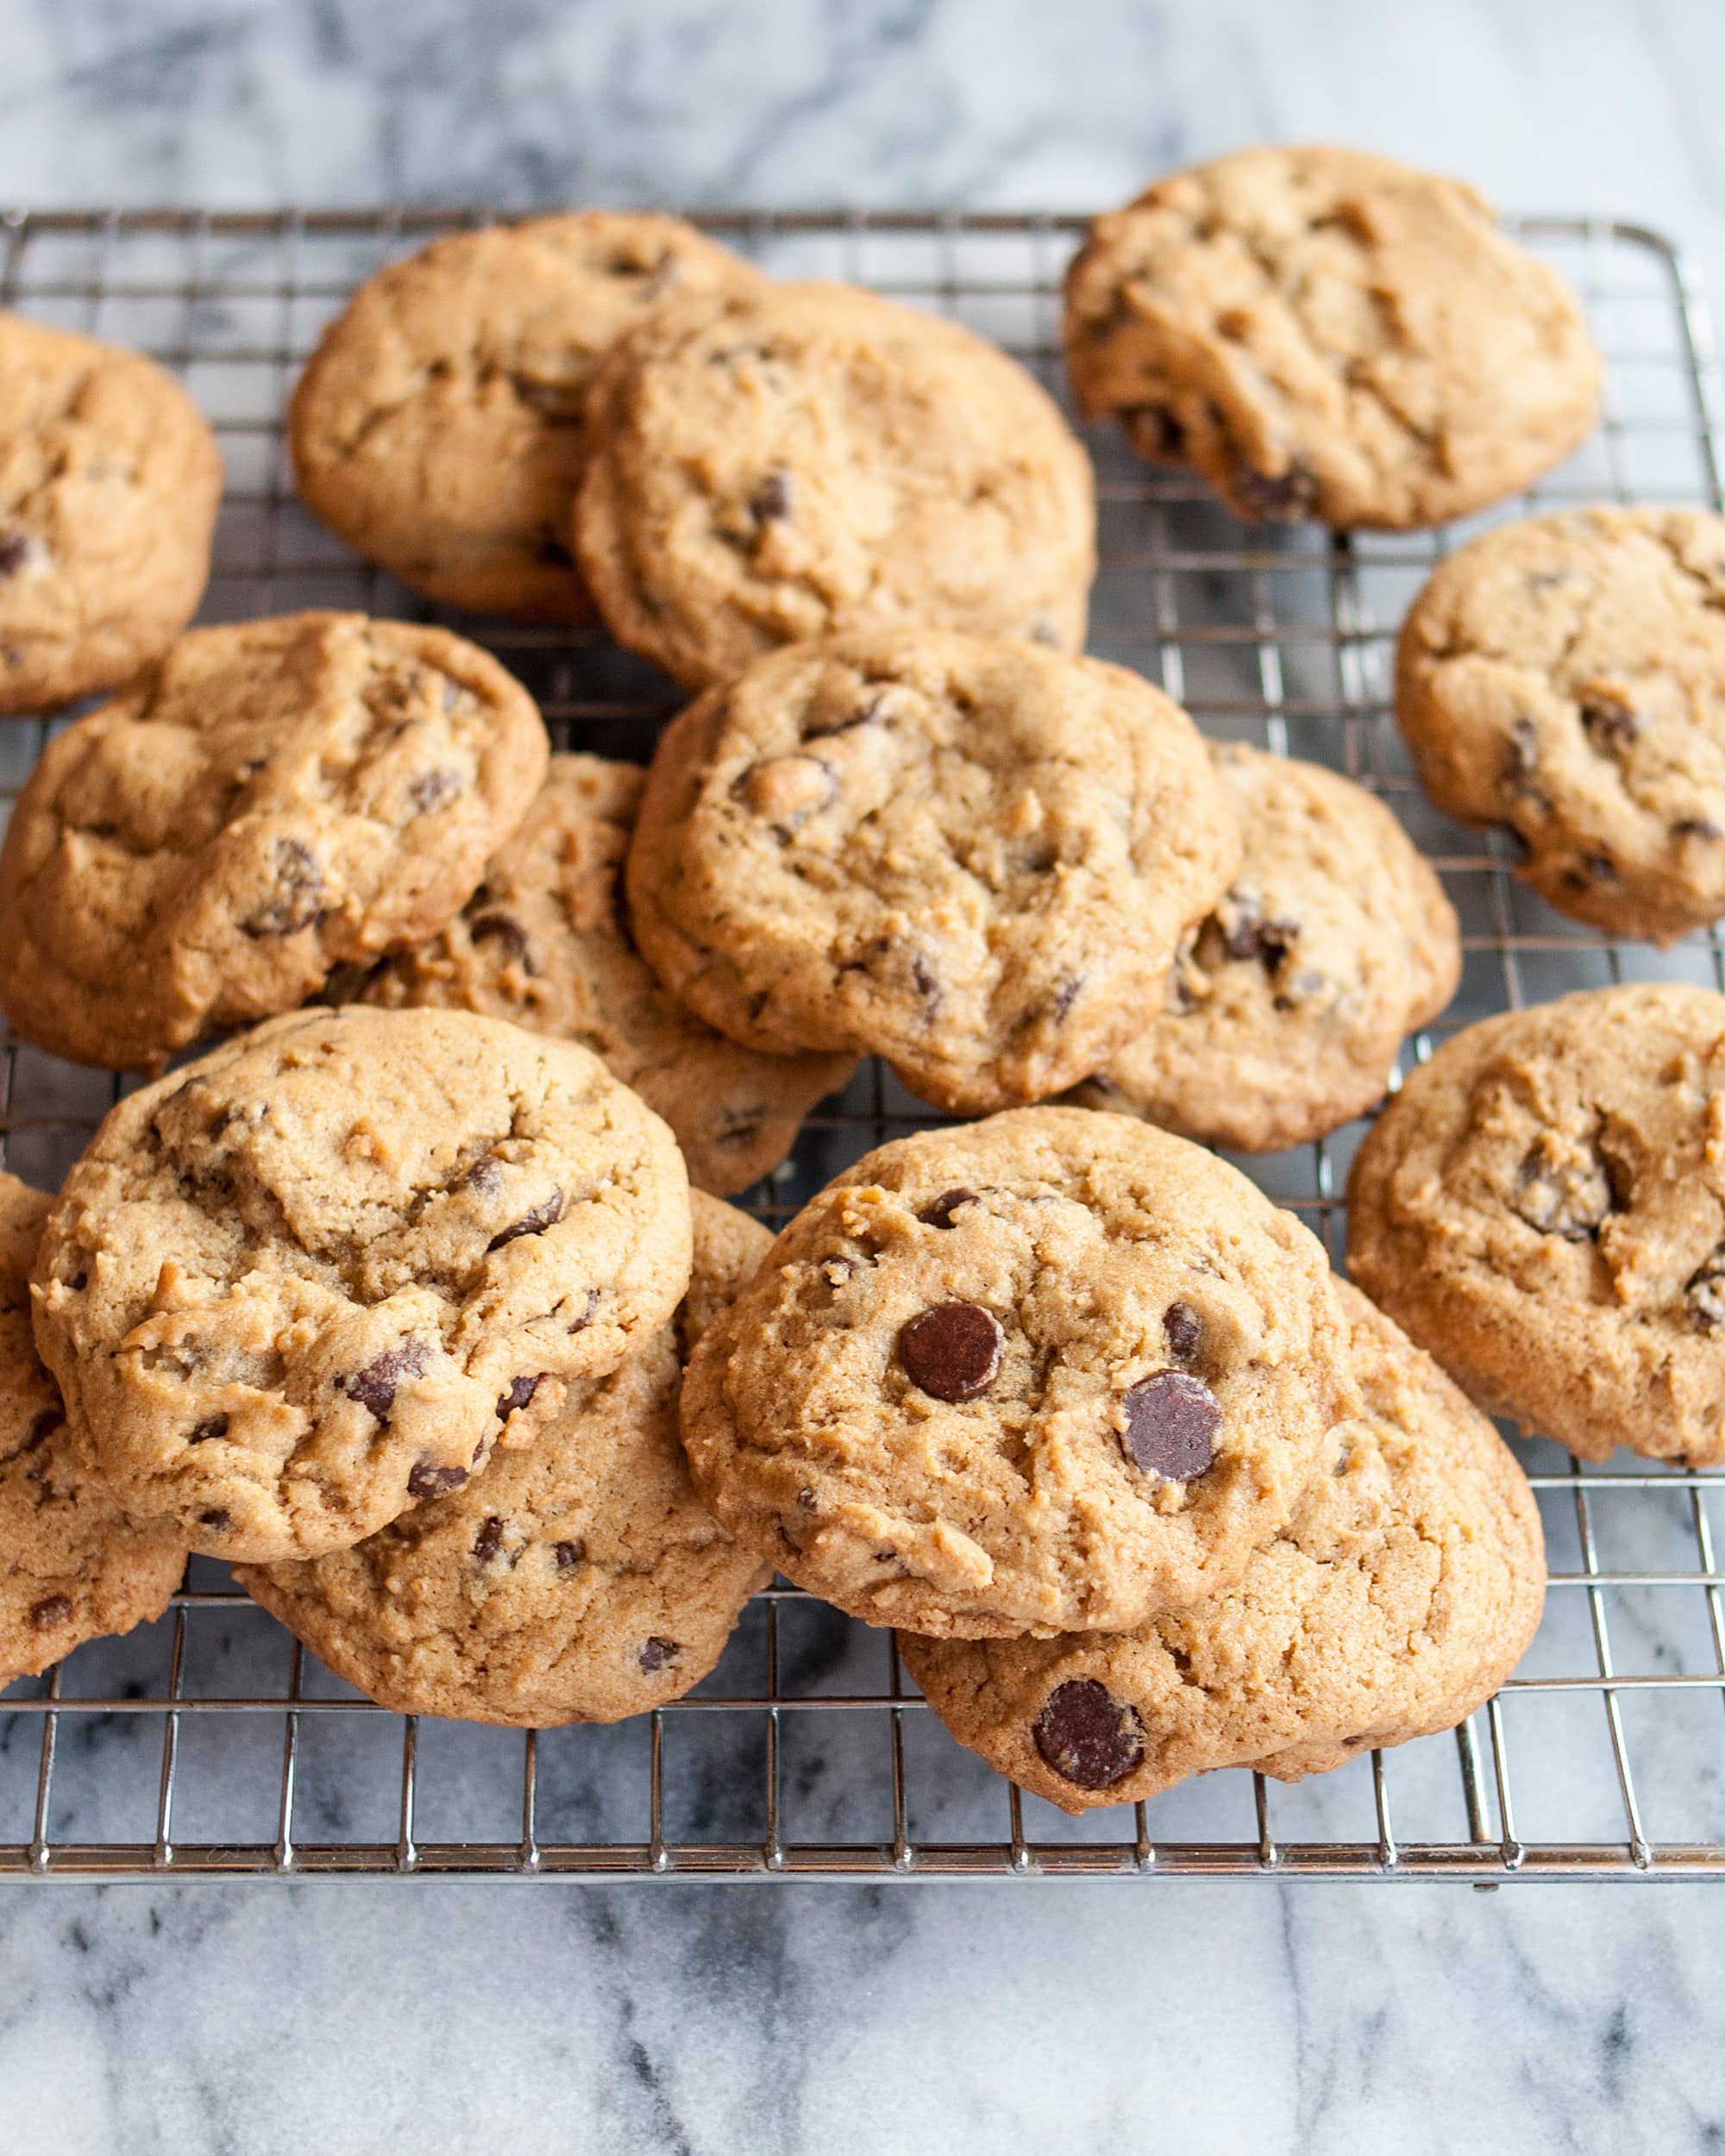 How To Make Chocolate Chip Cookies from Scratch | Kitchn